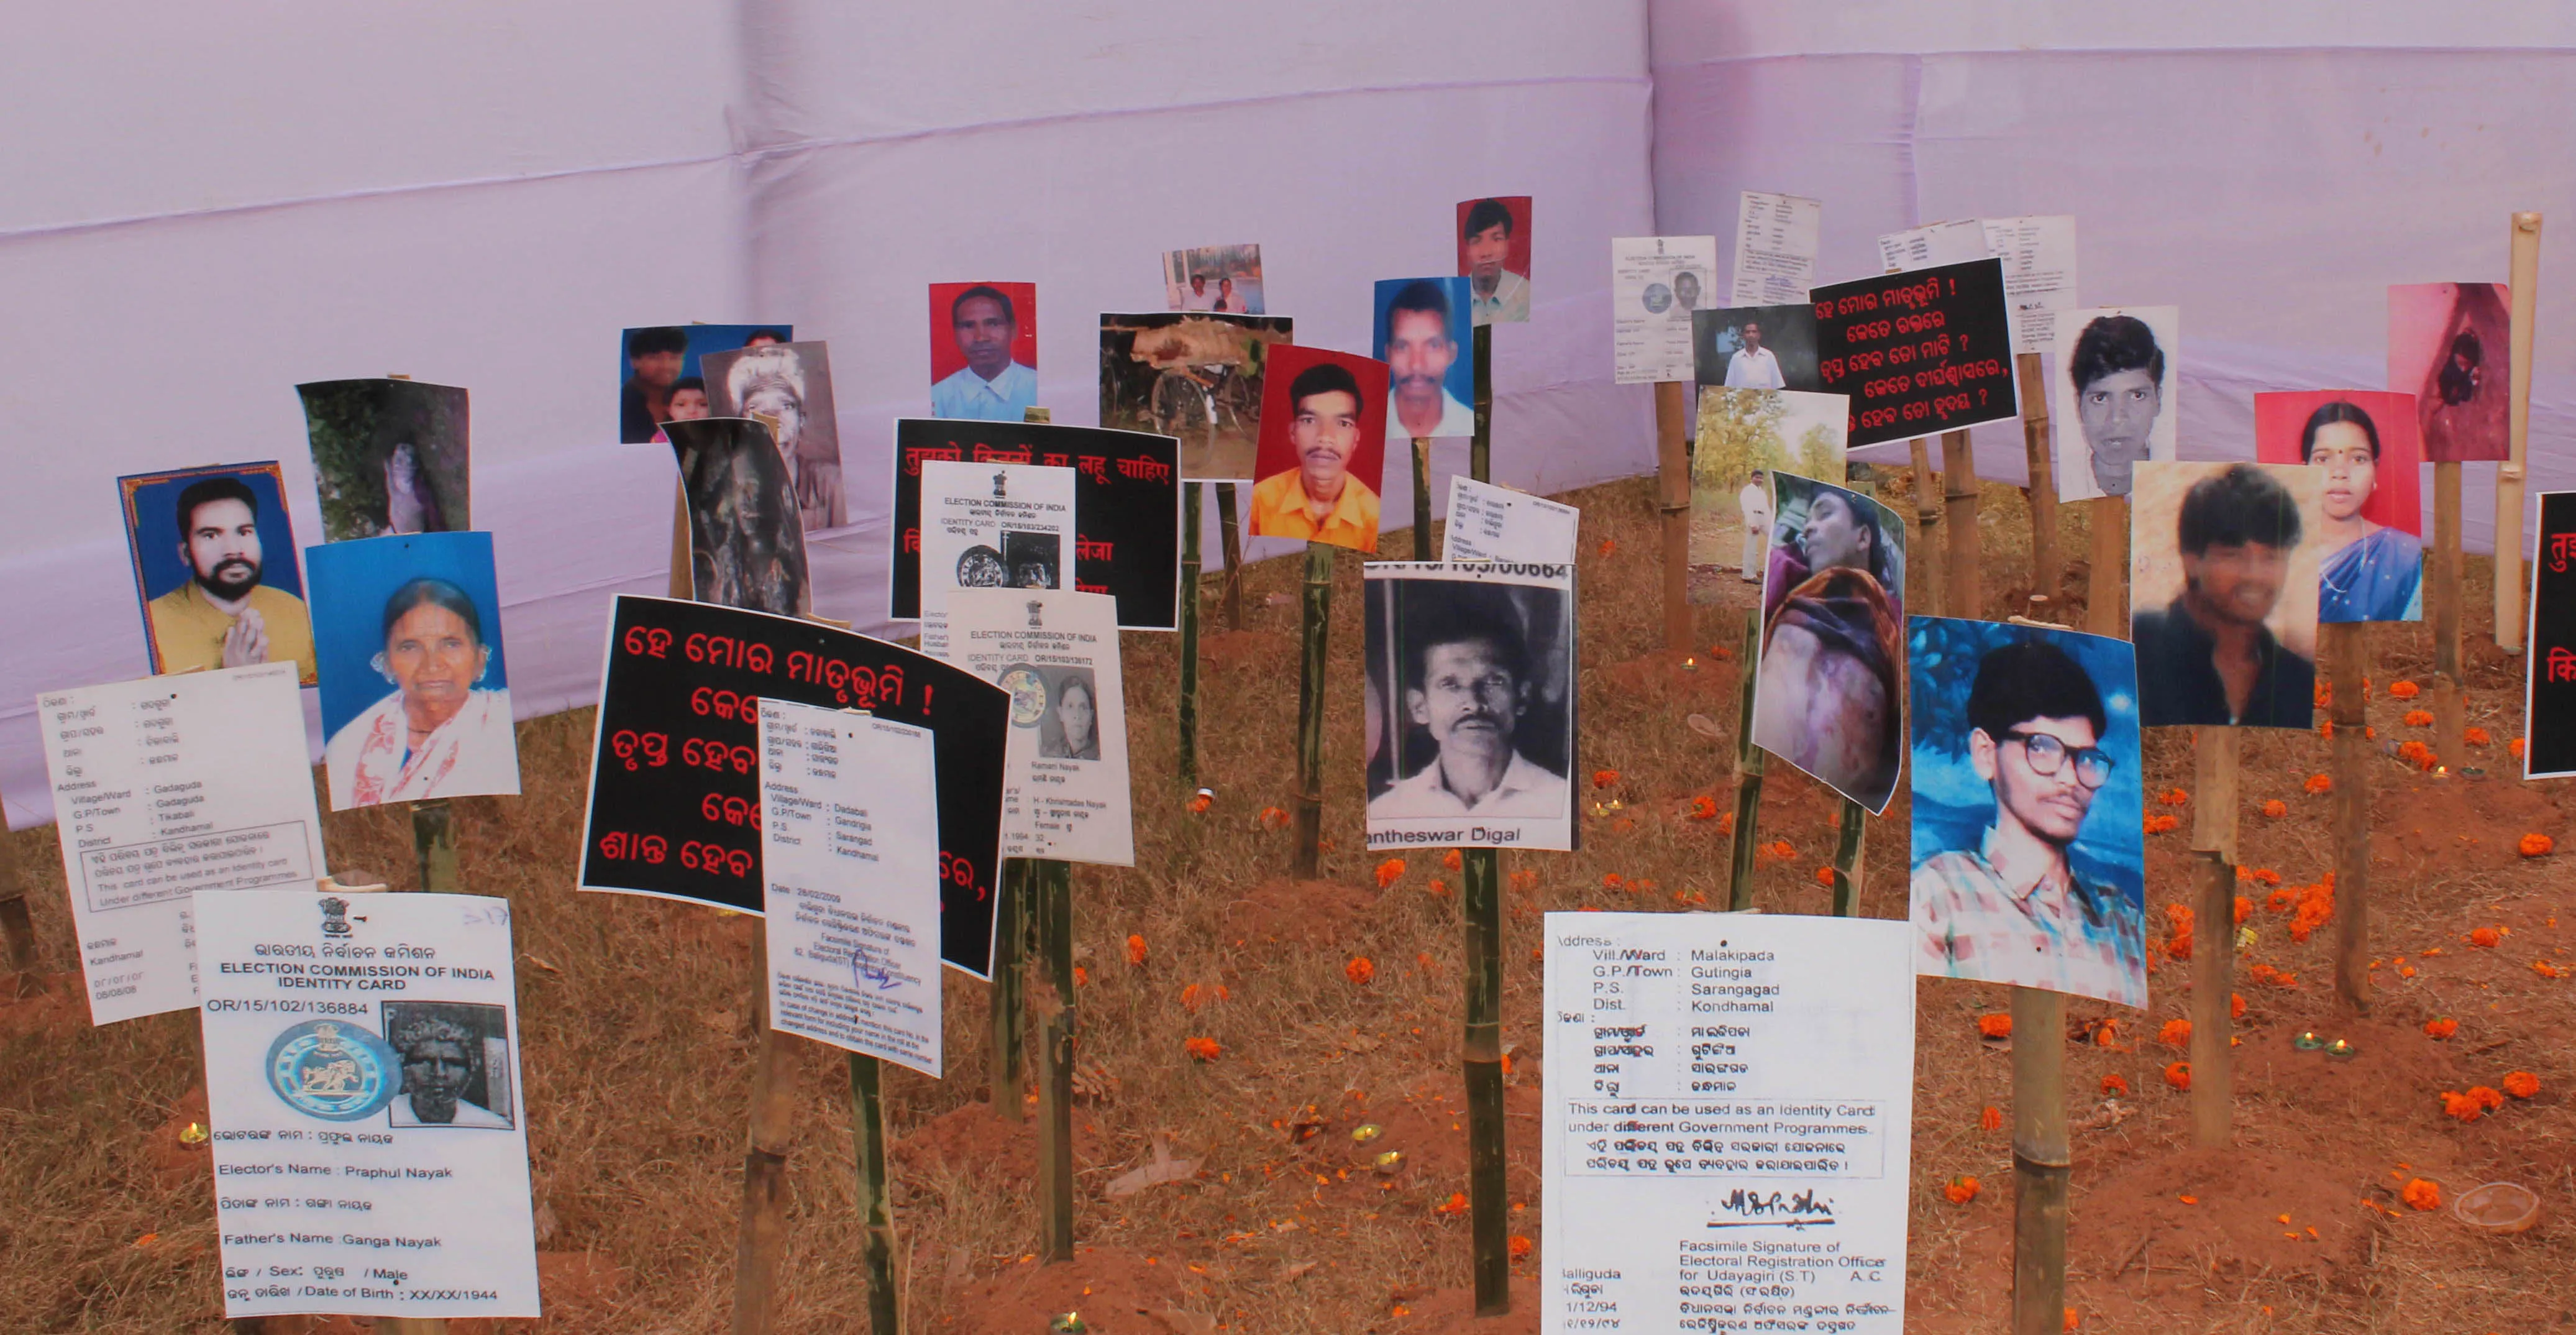 Photos of martyred Christians at a public event in Bhubaneswar in 2010.?w=200&h=150